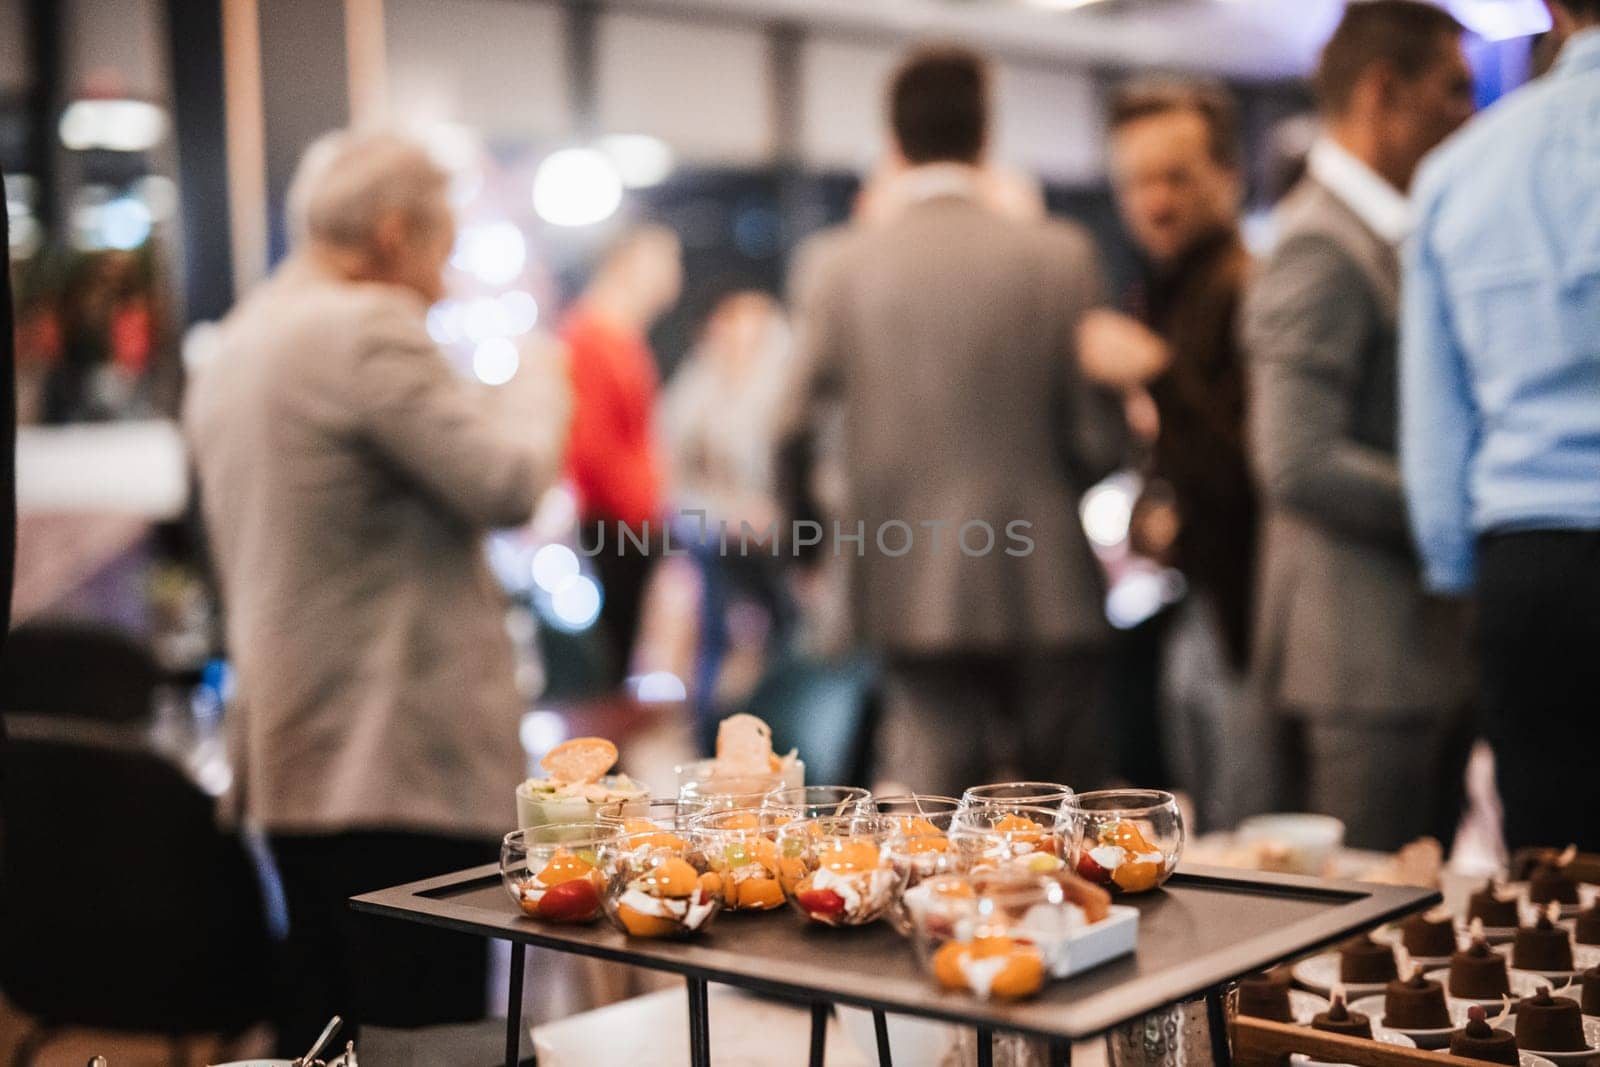 Blurred image of businesspeople at banquet event business meeting event. Business and entrepreneurship events concept. Focused on the canapes.